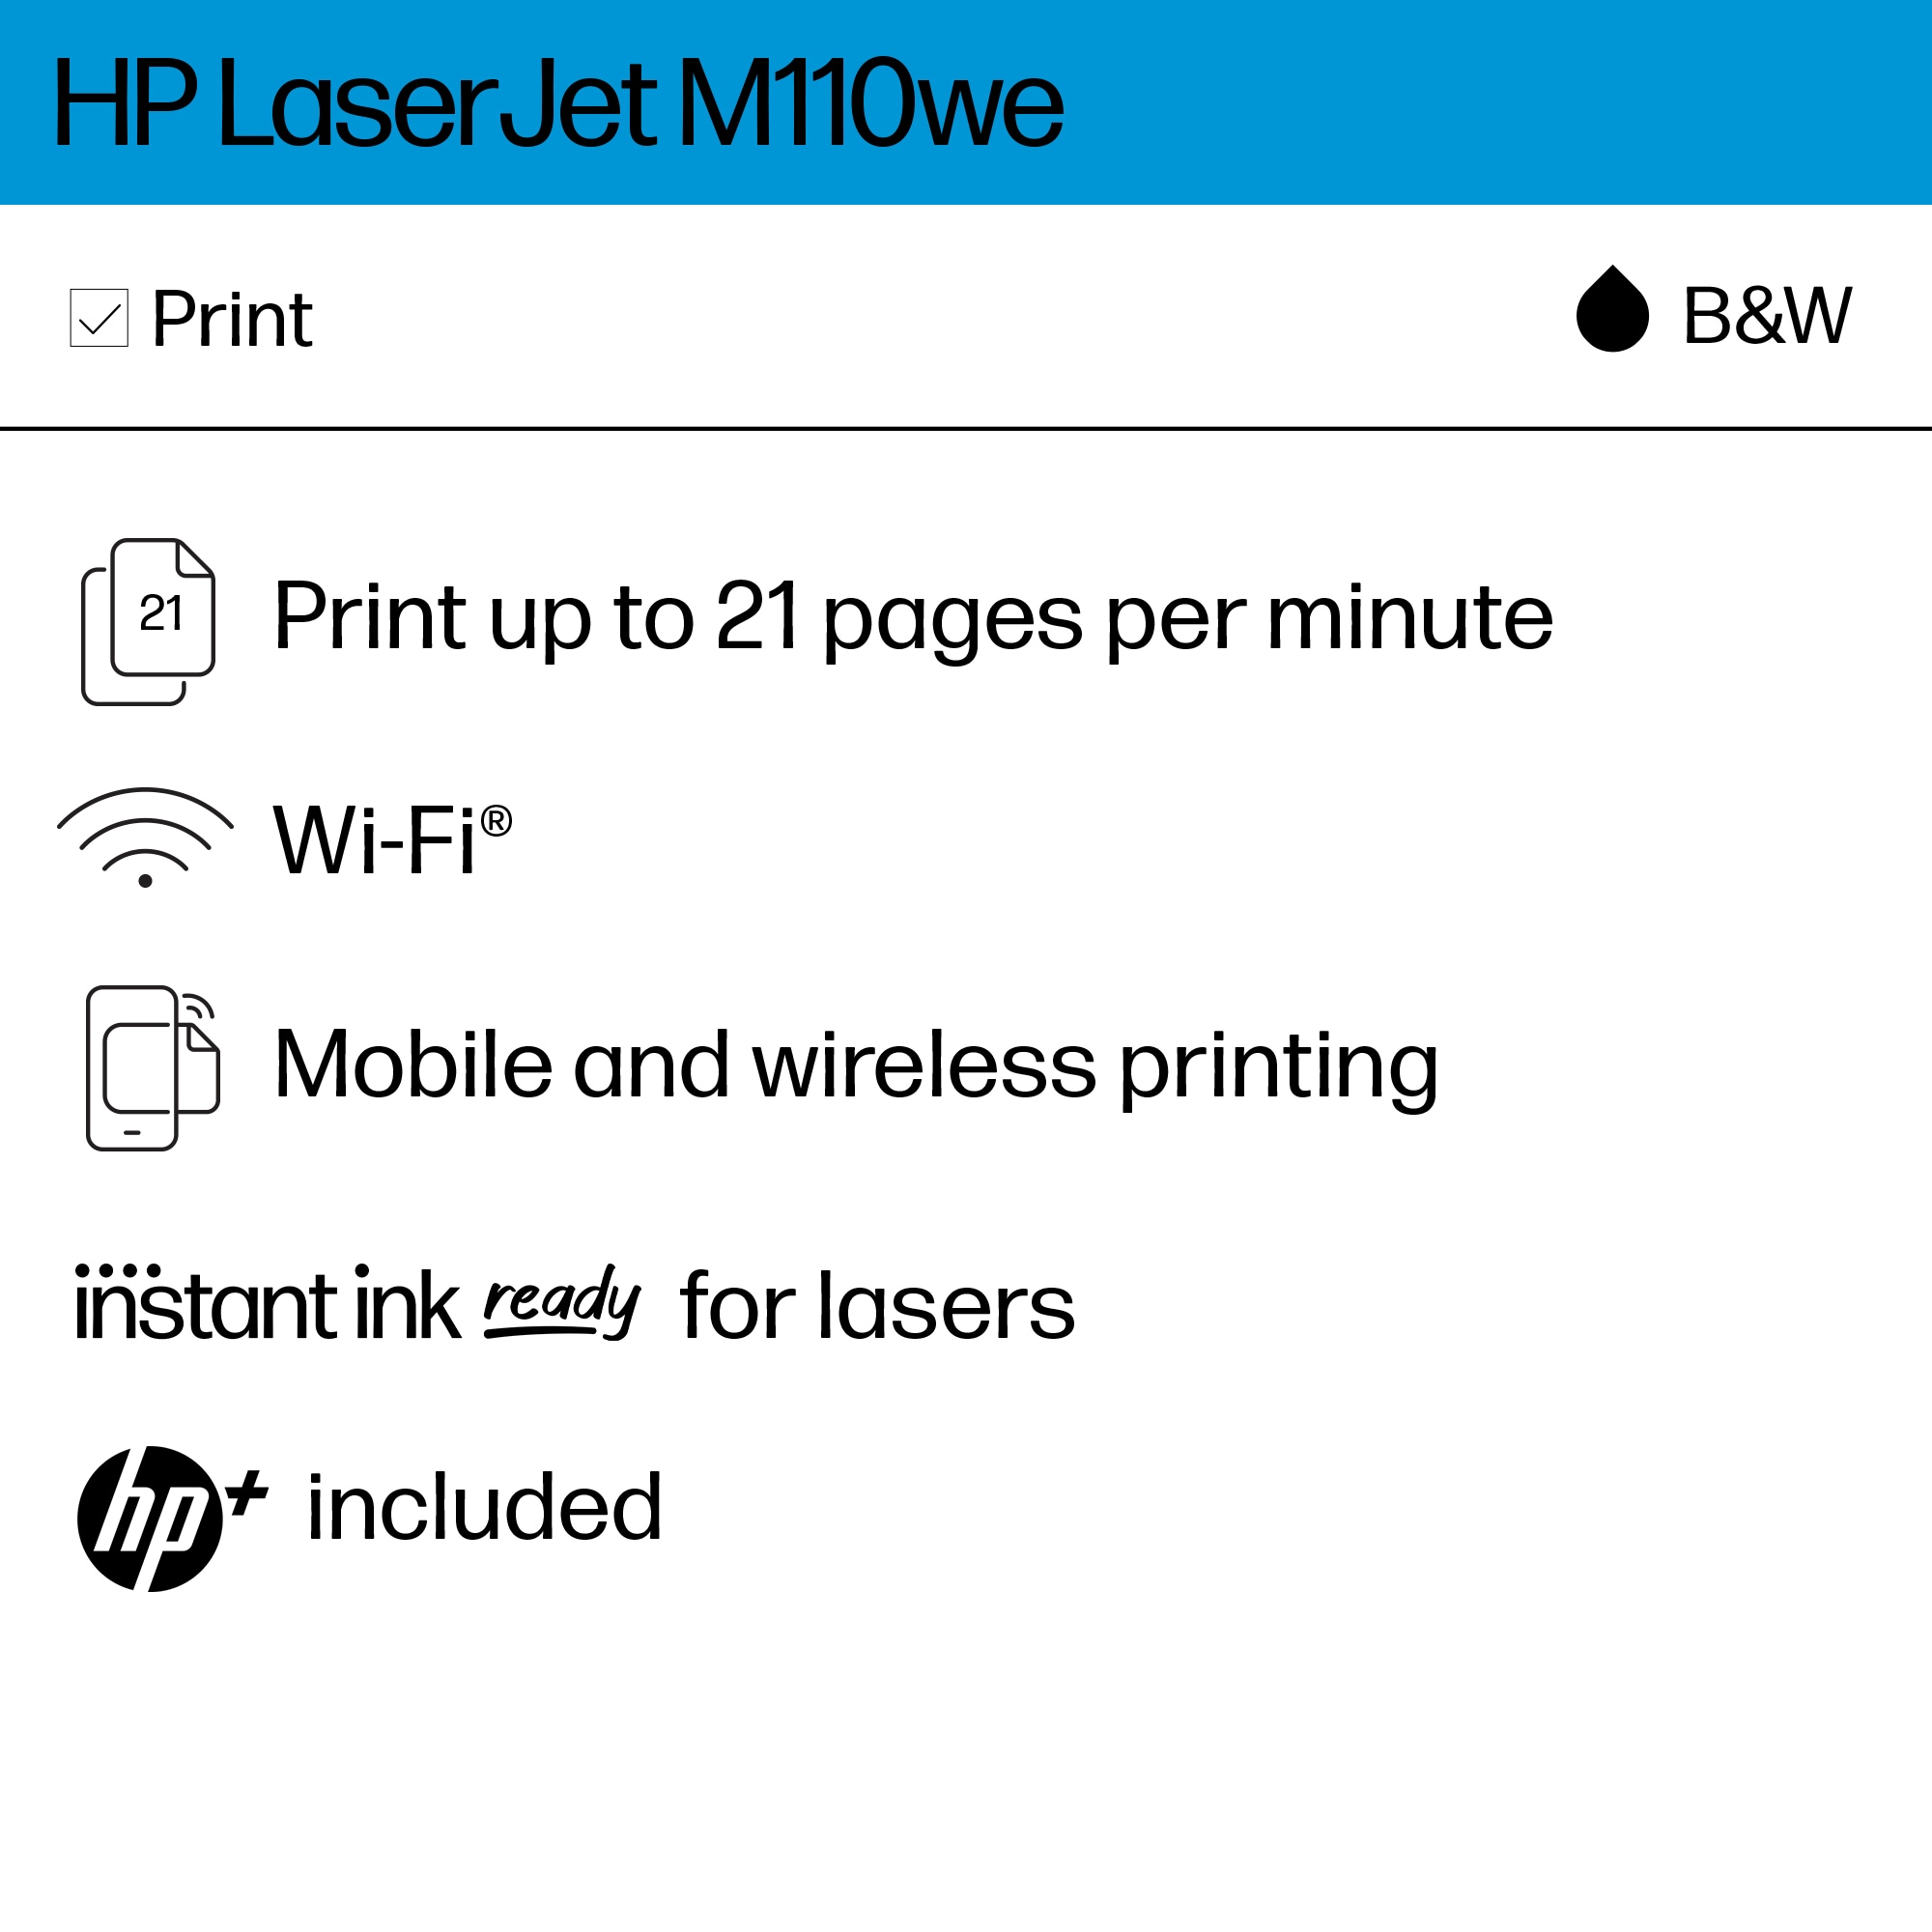 Printer and 6 HP M110we with HP+ Ink Instant Months LaserJet